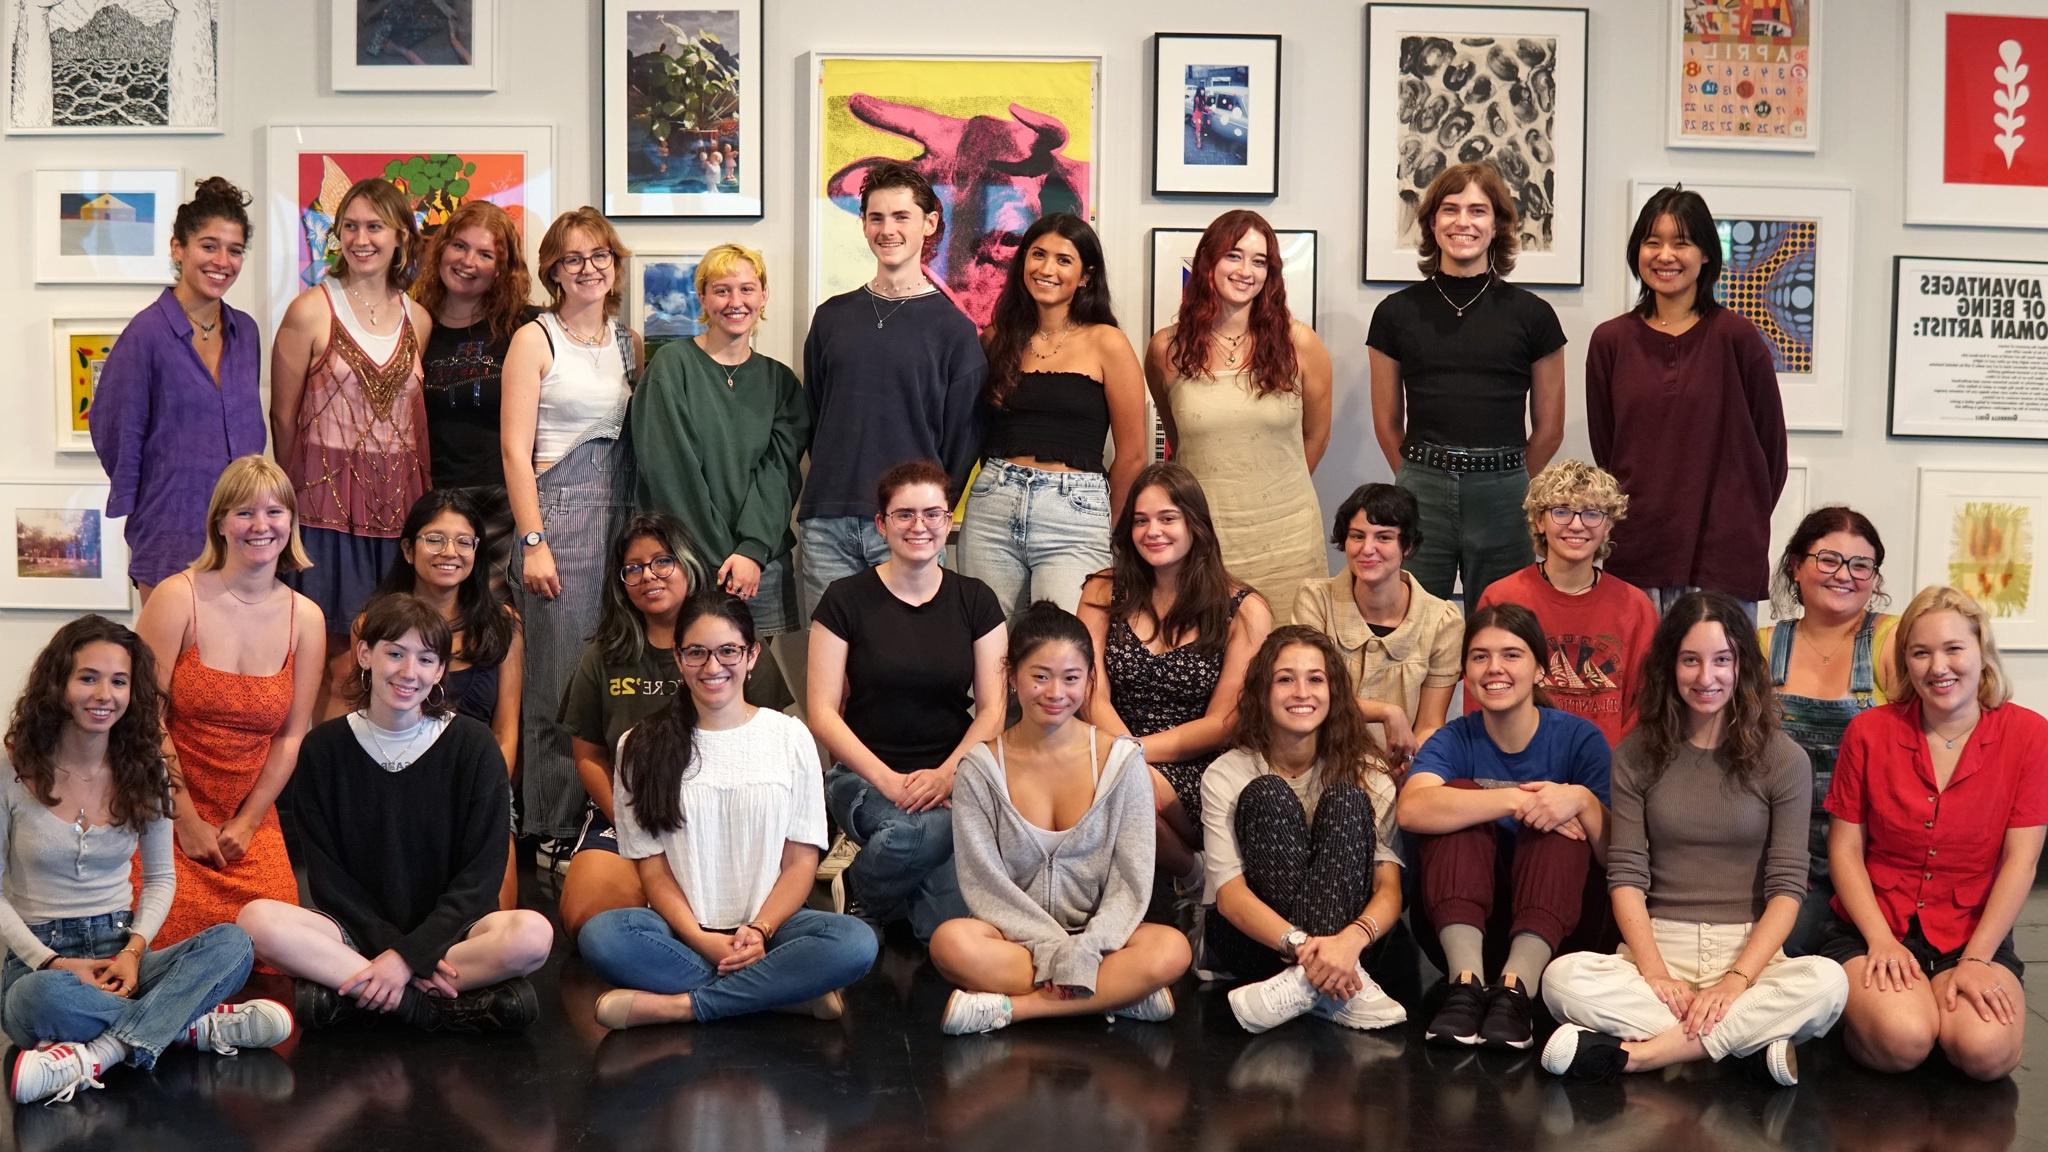 The Tang Student Advisory Council stand and sit against a backdrop of art in the Frances Young Tang Teaching Museum and Art Gallery.